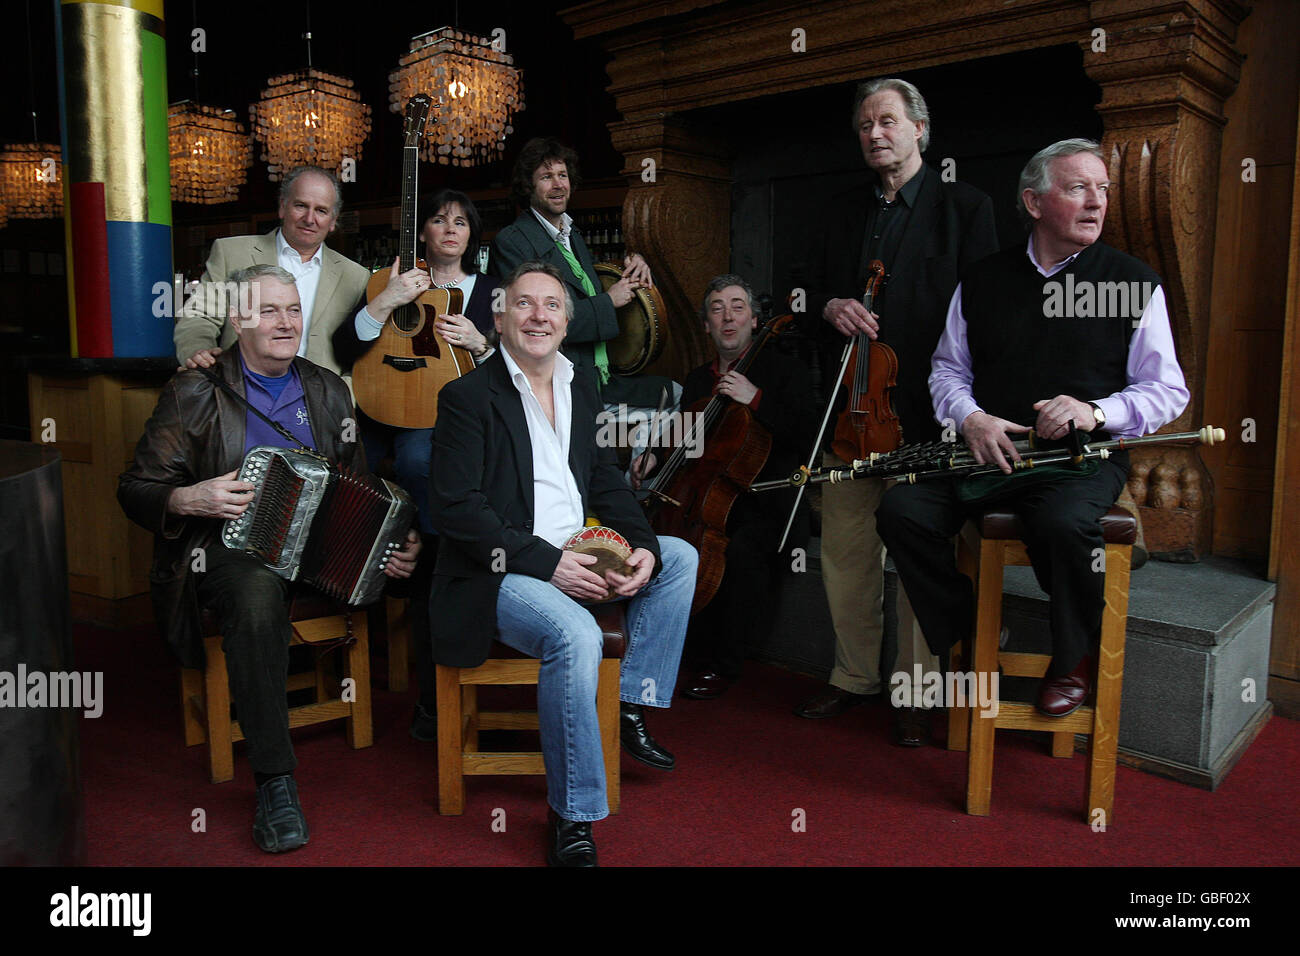 Members of the Chieftans, Planxty, Hothouse Flowers and Moving Hearts (left to right) Seamus Begley, Shaun Davey, Rita Connolly, Noel Eccles, Liam O'Maonlaoi, Niel Martin, Sean Keane and Liam O'Flynn gather in Vicar St.Dublin to announce details of their 'Super Group' performance in The Waterfront Hall Befast on May 4th in support of the charity Suicide Awareness. Stock Photo